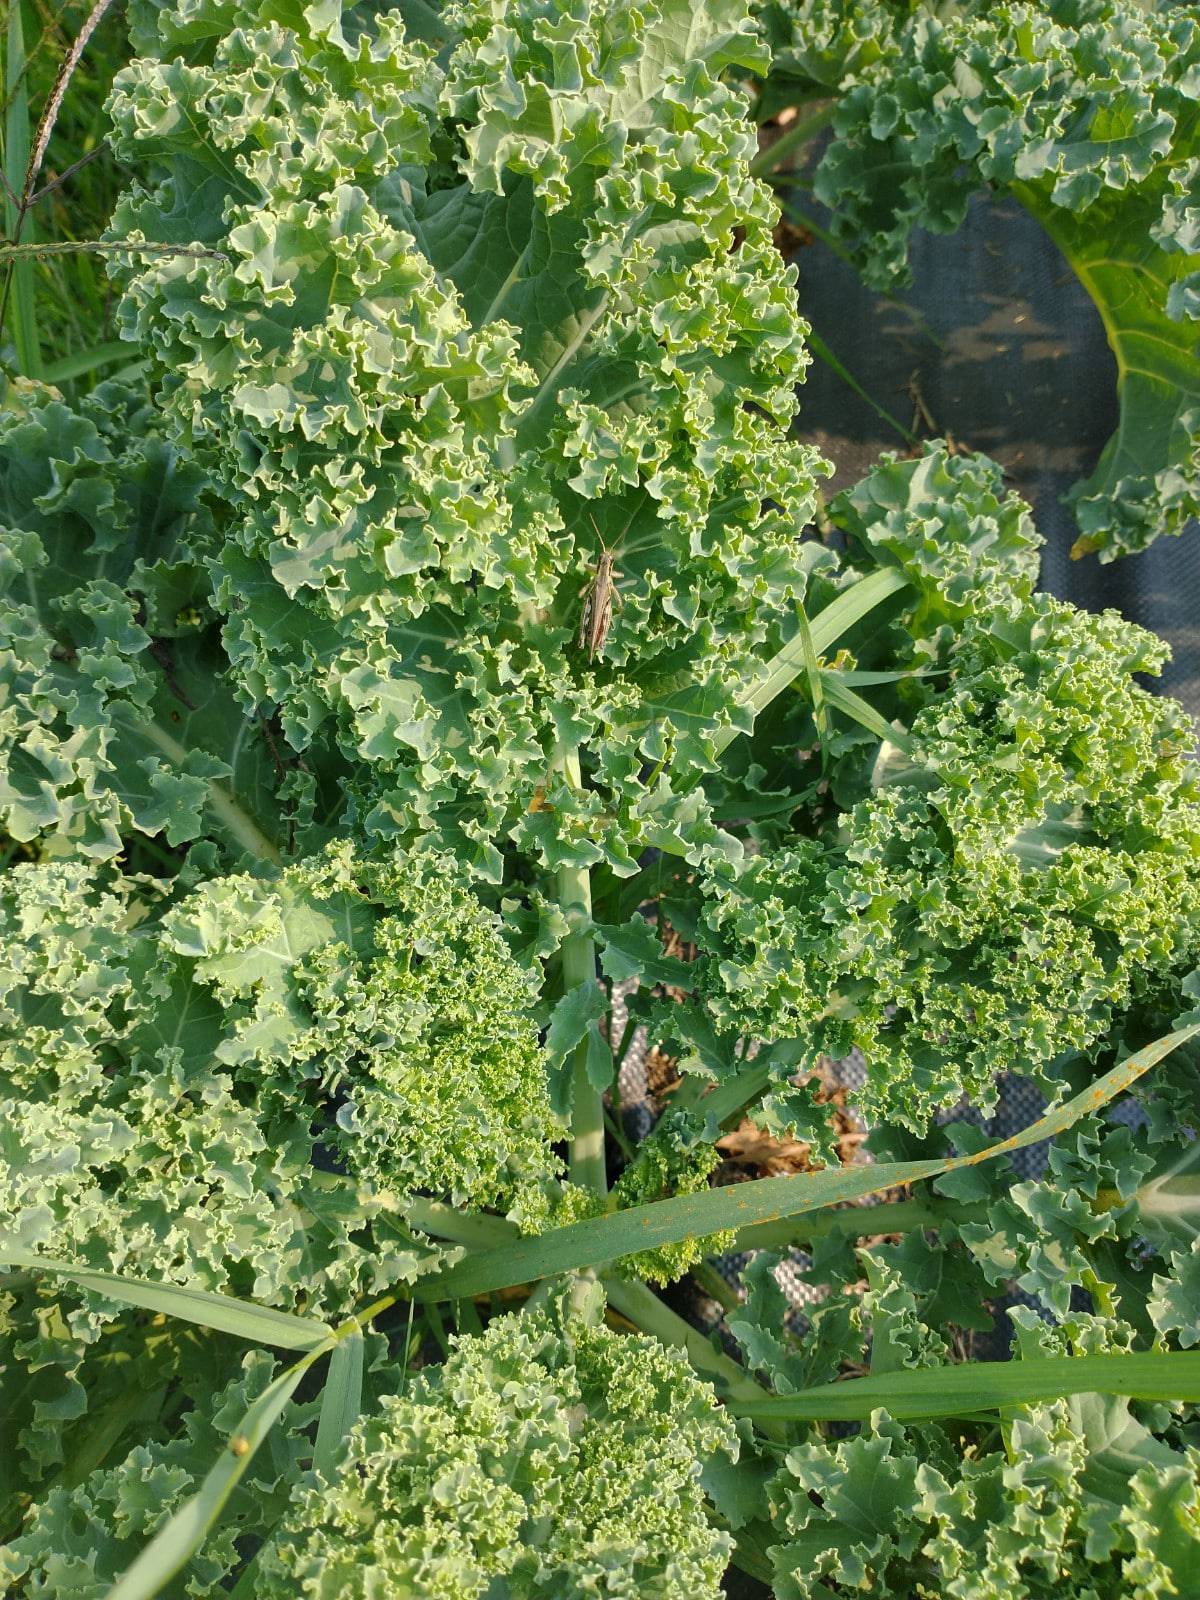 Curly kale bunch